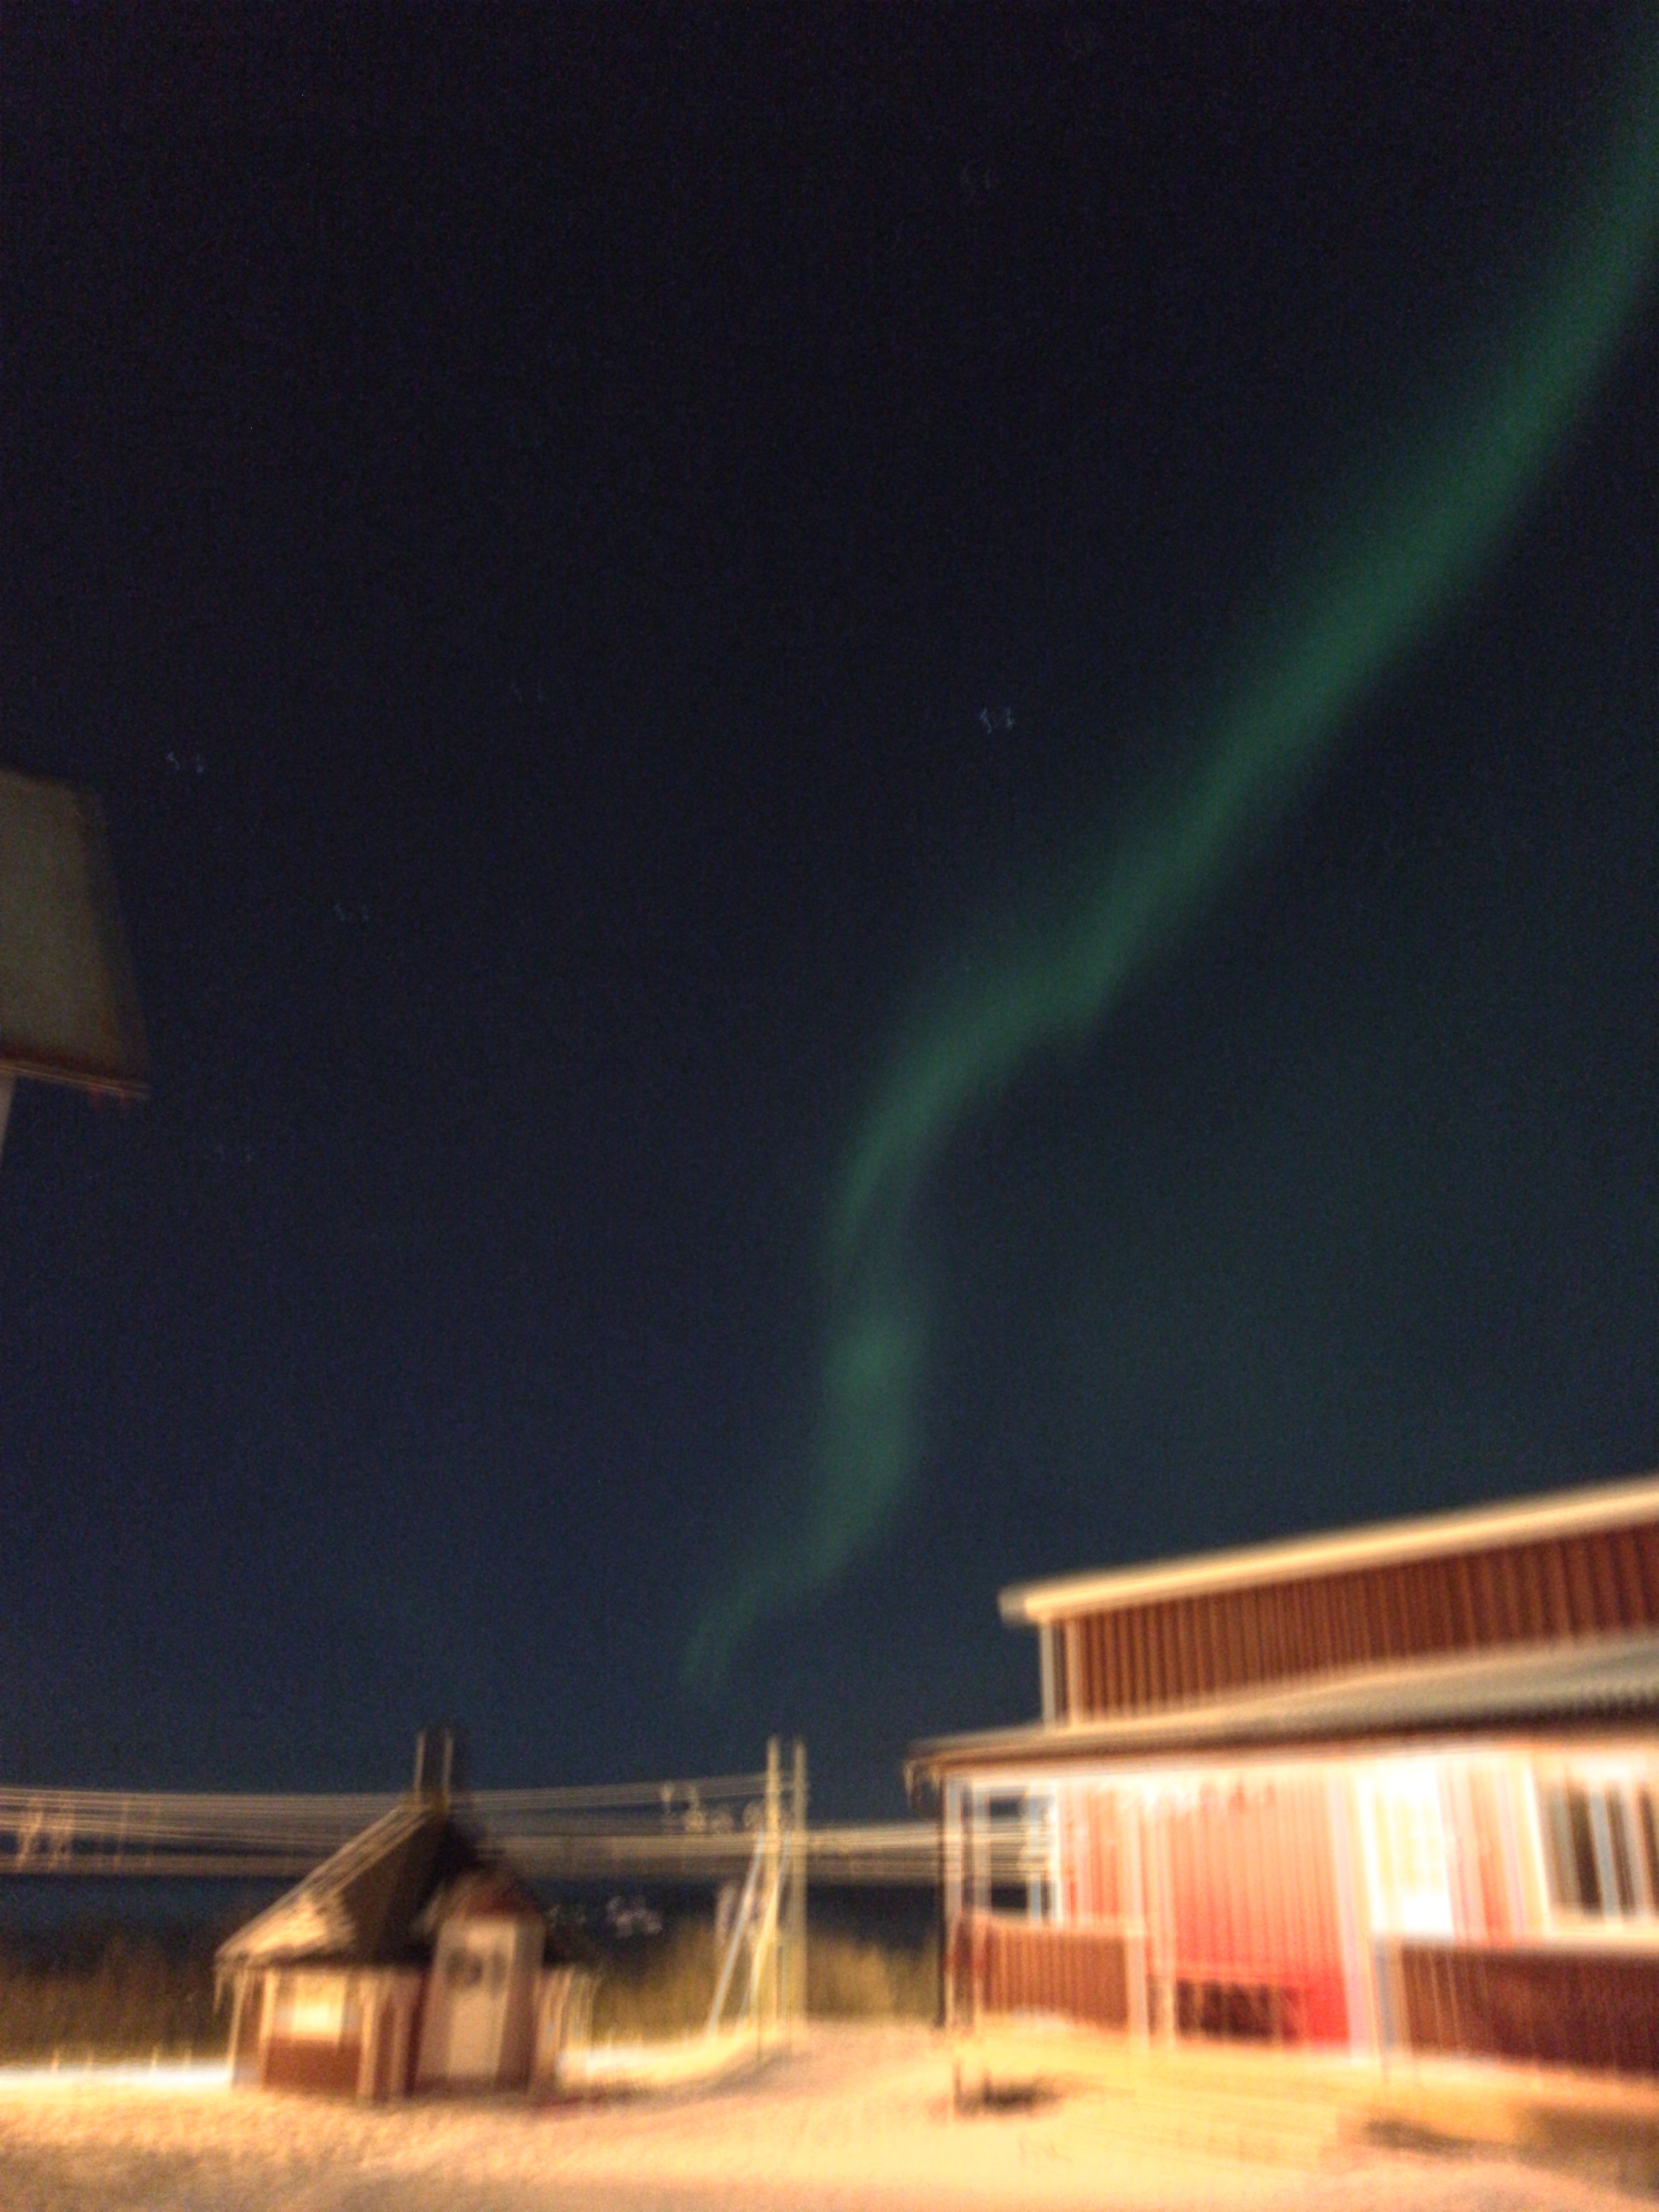 Abisko Northern Lights with our hostel in the foreground